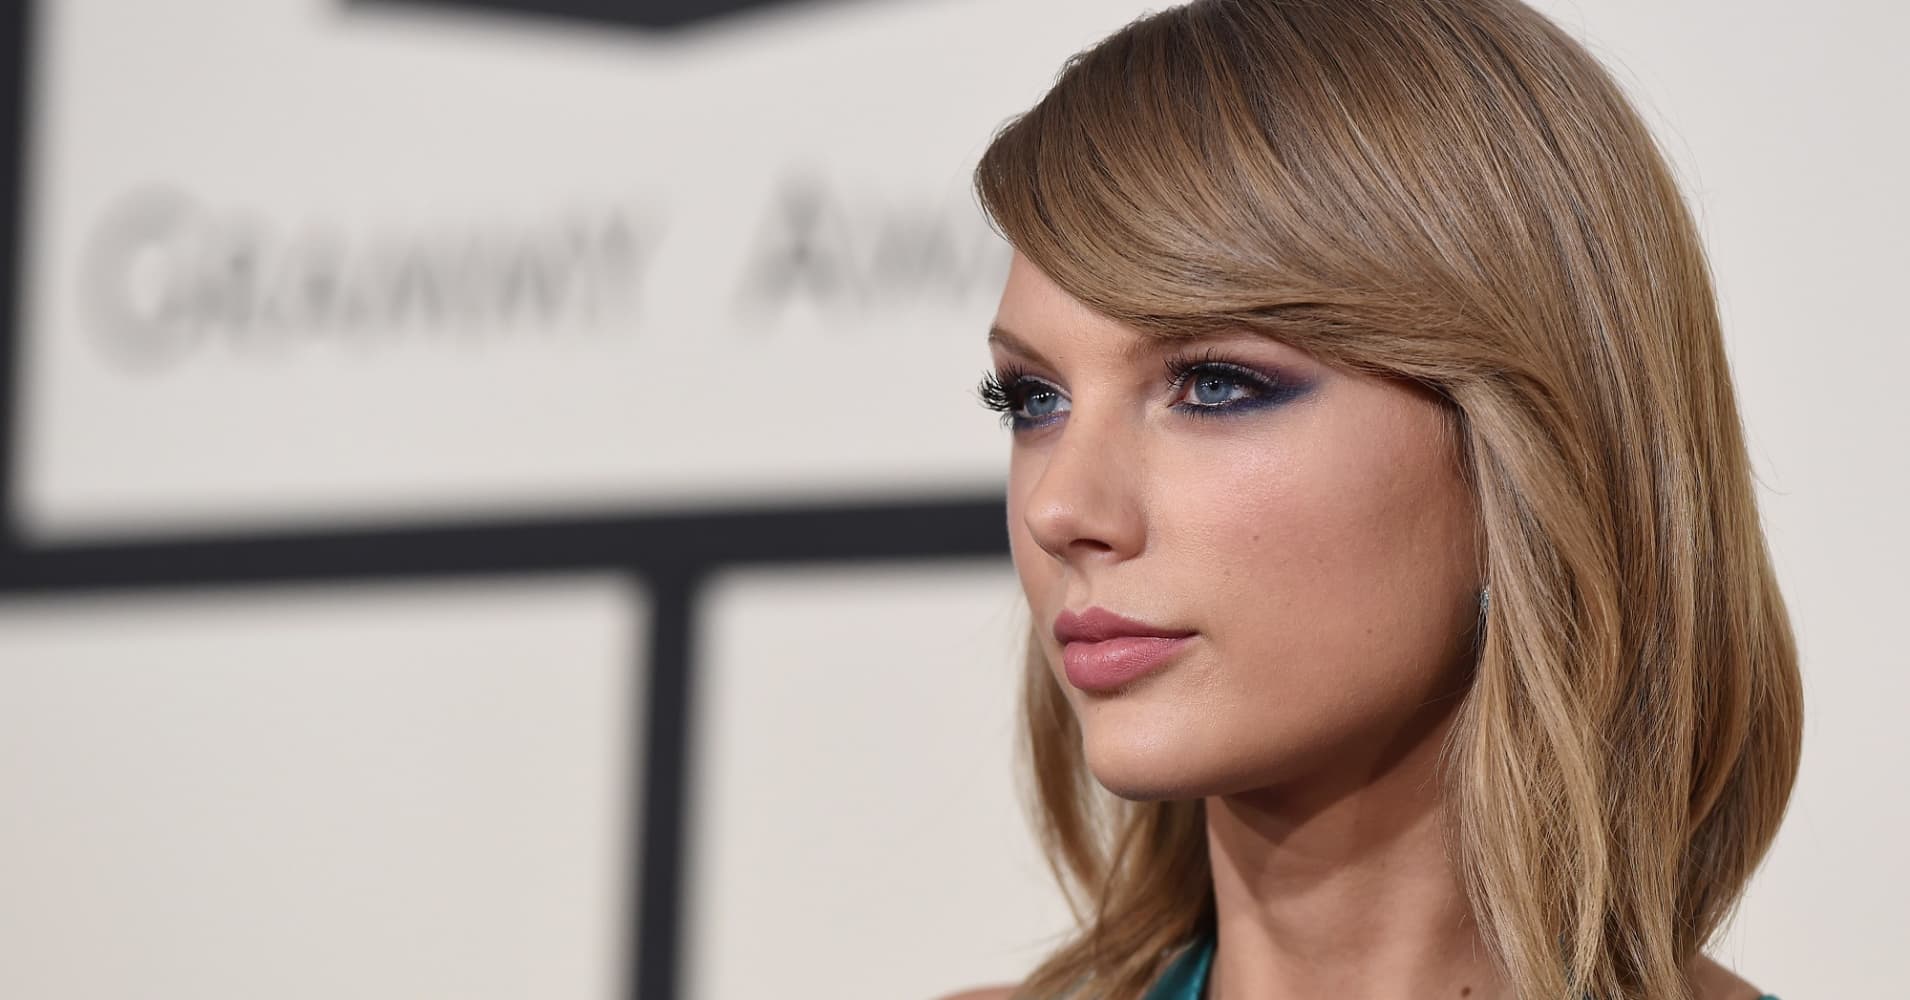 How Taylor Swift's political endorsement could become the 'biggest ripple ever' at the polls